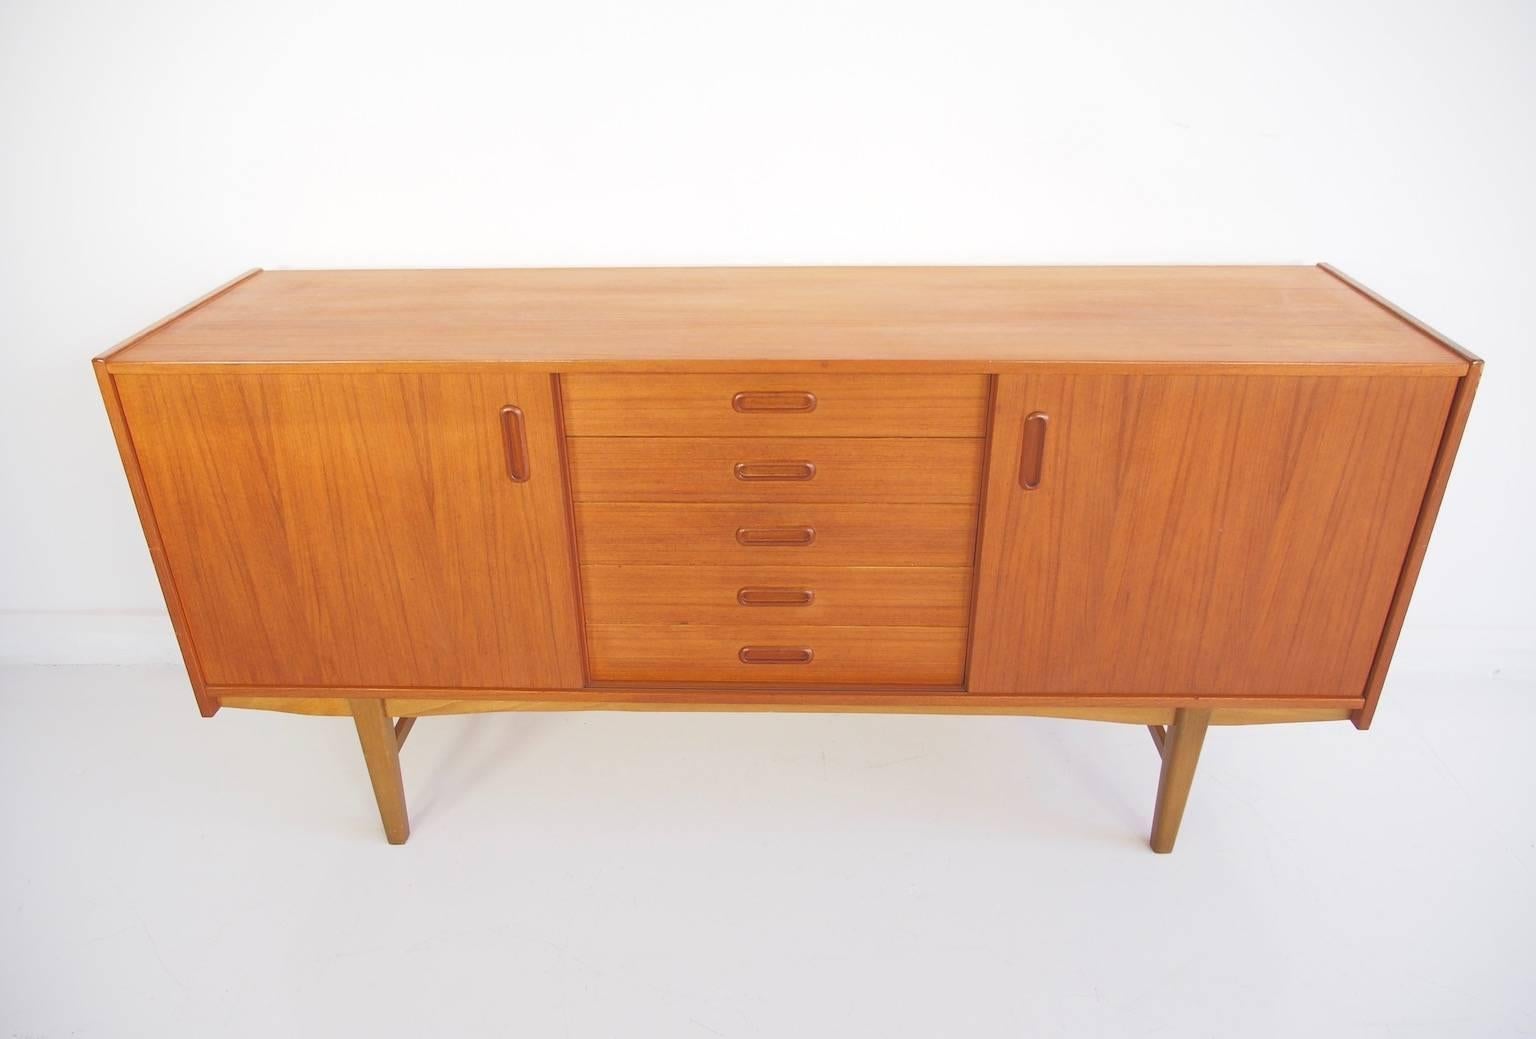 Teak sideboard with five drawers with green lining and doors on both sides, behind which are shelves. Partially restored. Minor dents on the side and the corner of the sideboard, pictured.